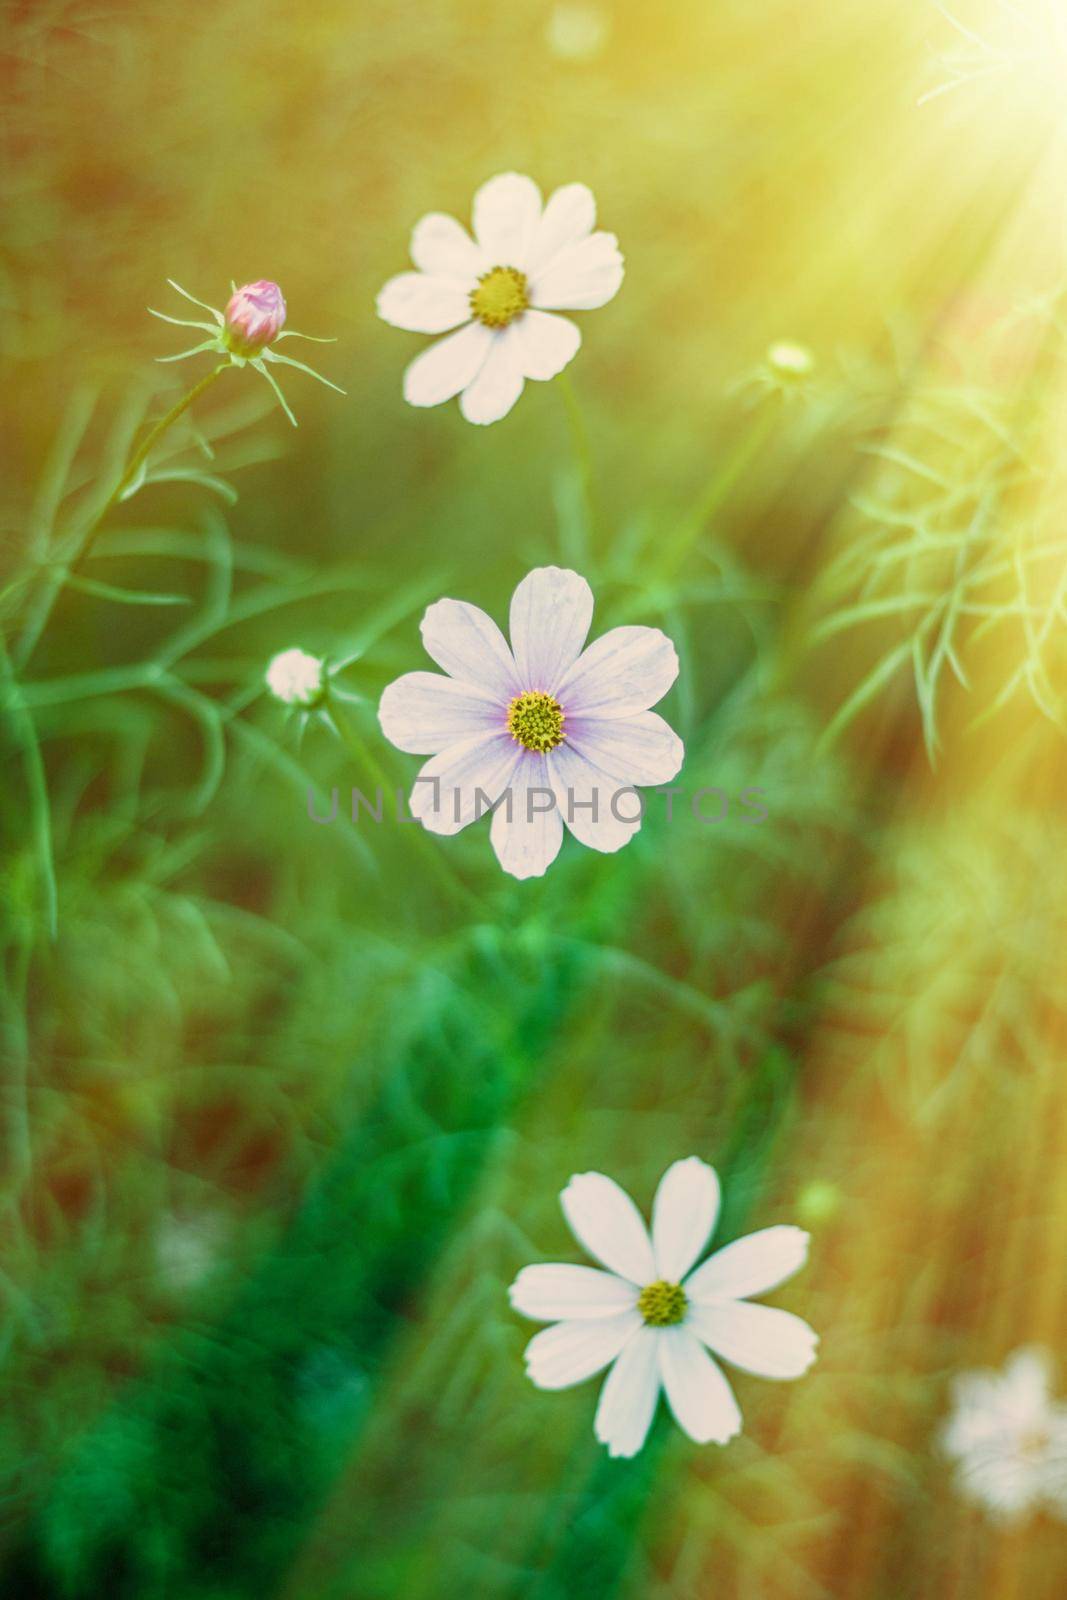 Daisy flowers in sunlight - springtime, beauty in nature and gardening concept. Garden dream in sunny day